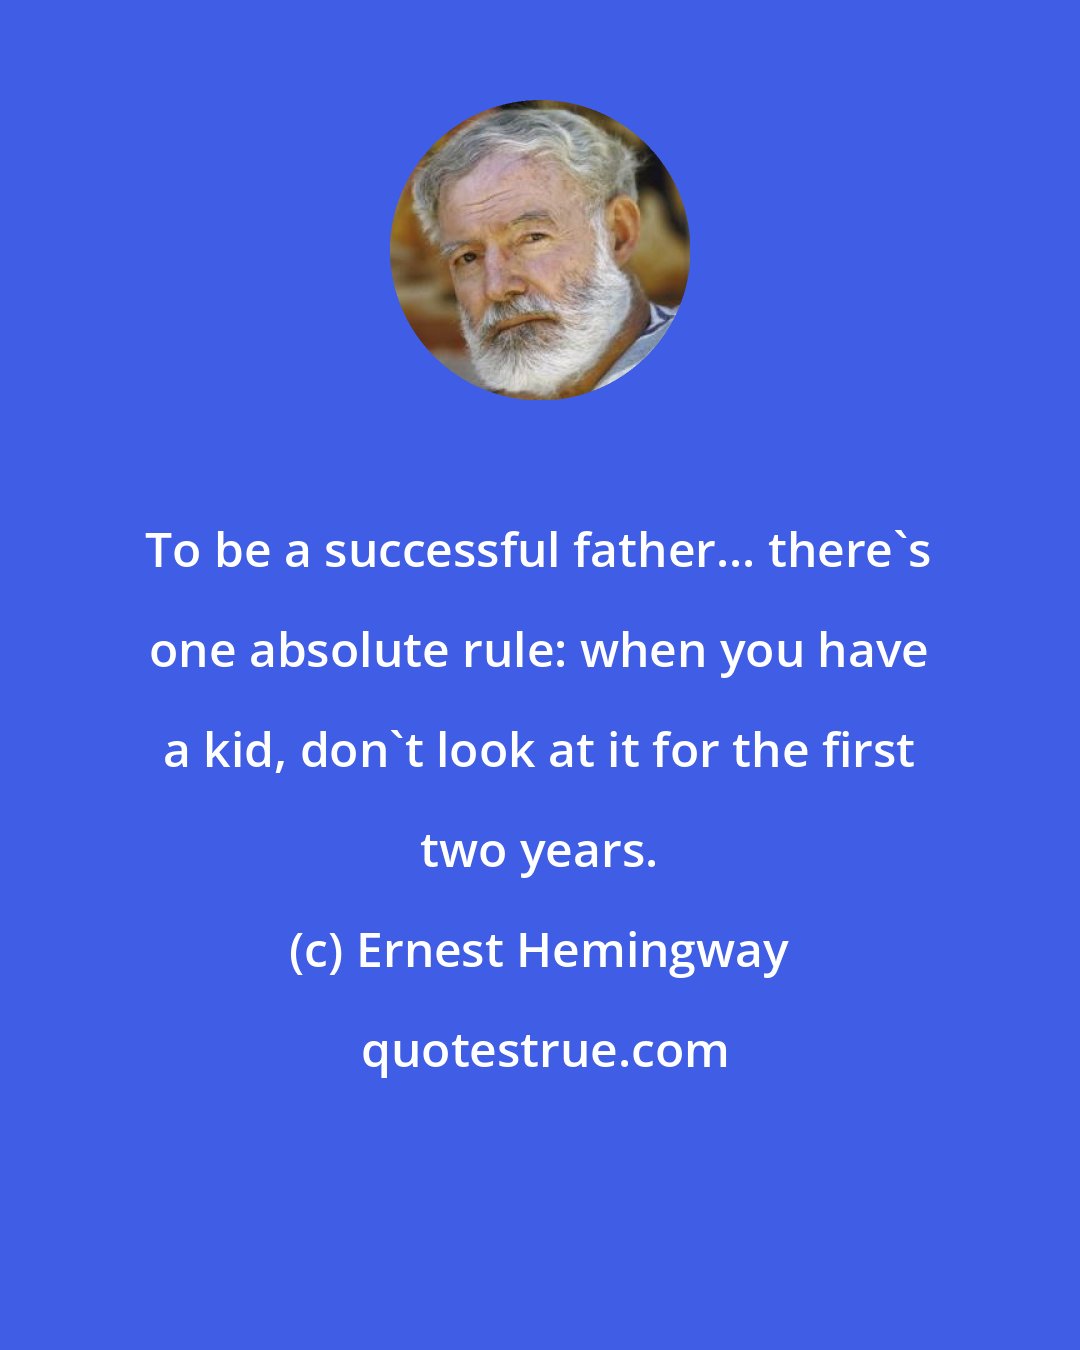 Ernest Hemingway: To be a successful father... there's one absolute rule: when you have a kid, don't look at it for the first two years.